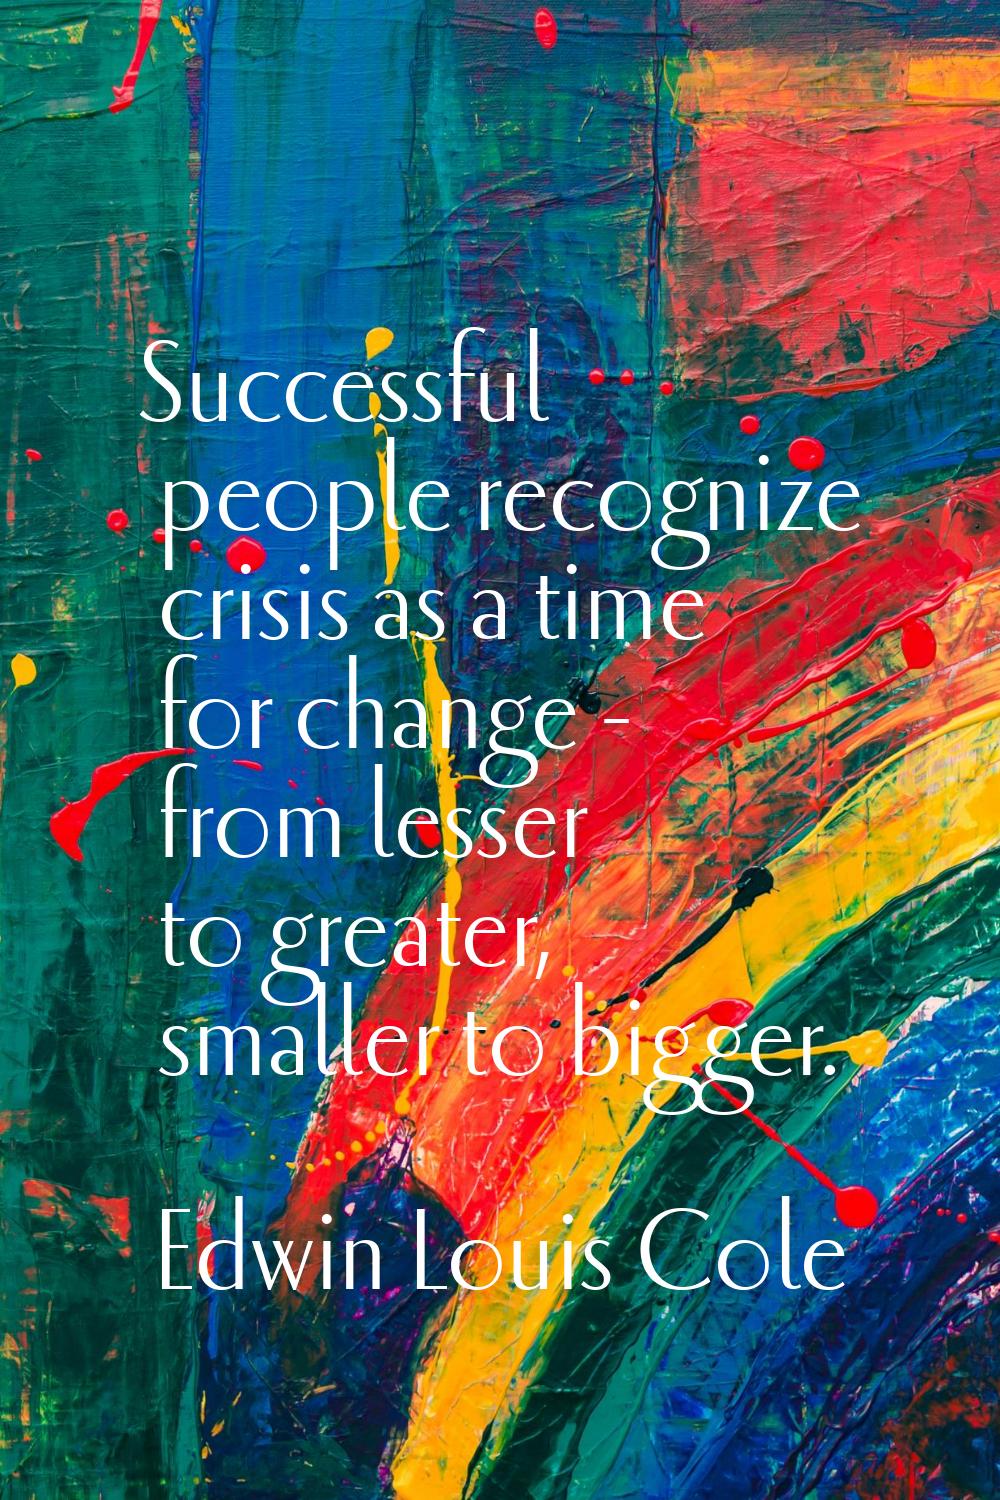 Successful people recognize crisis as a time for change - from lesser to greater, smaller to bigger